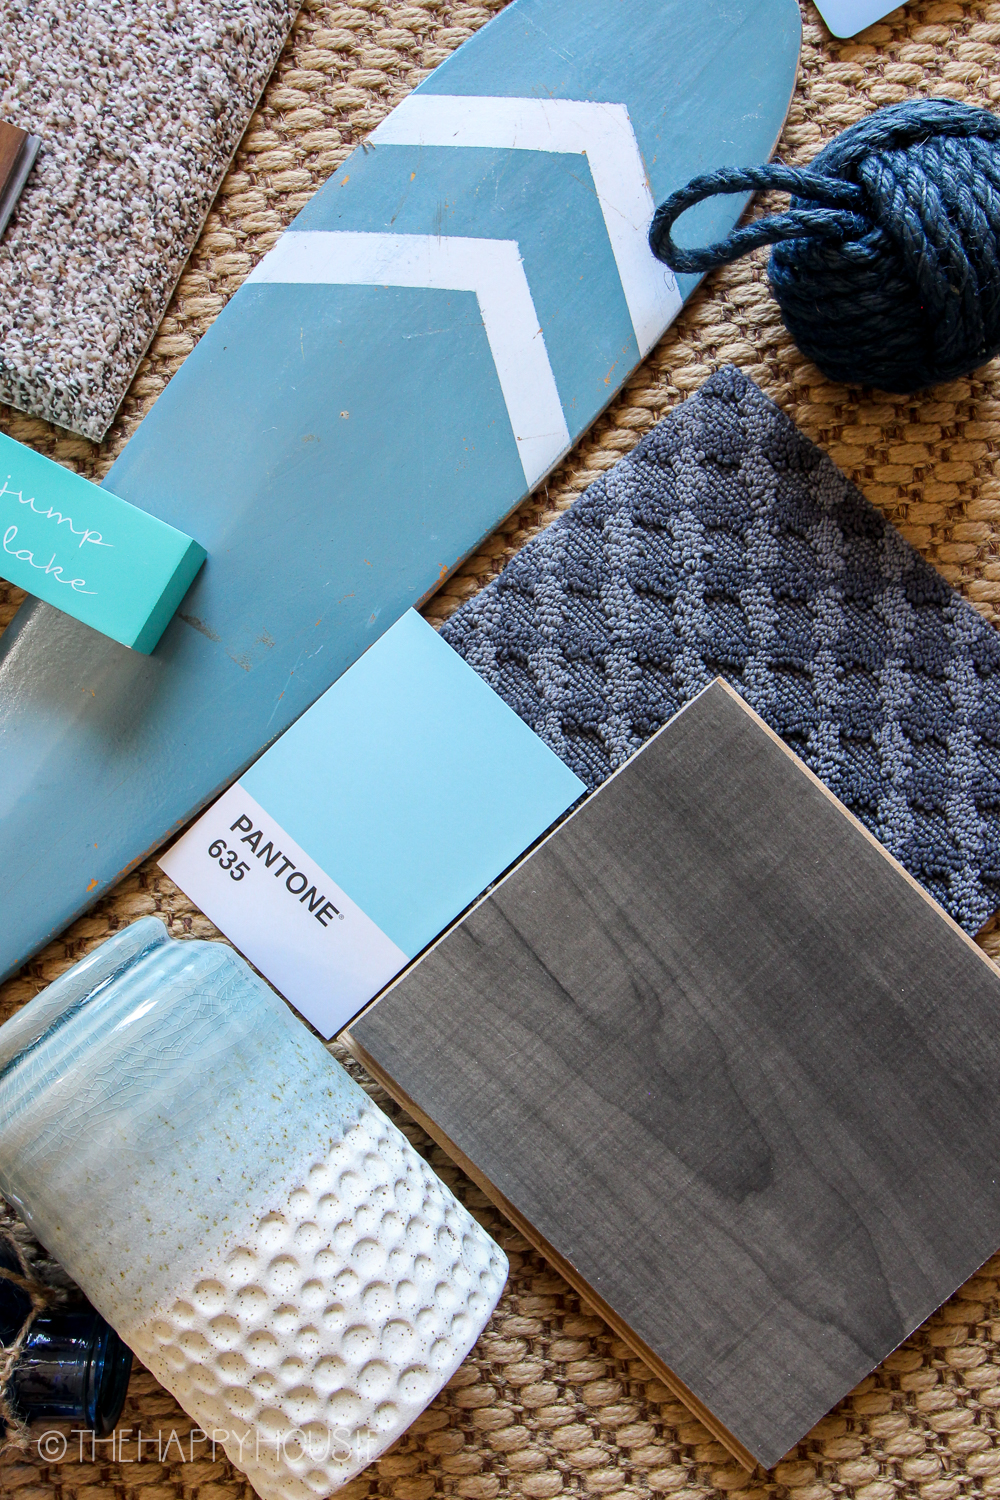 Swatches of colour and flooring samples in a blue grey.